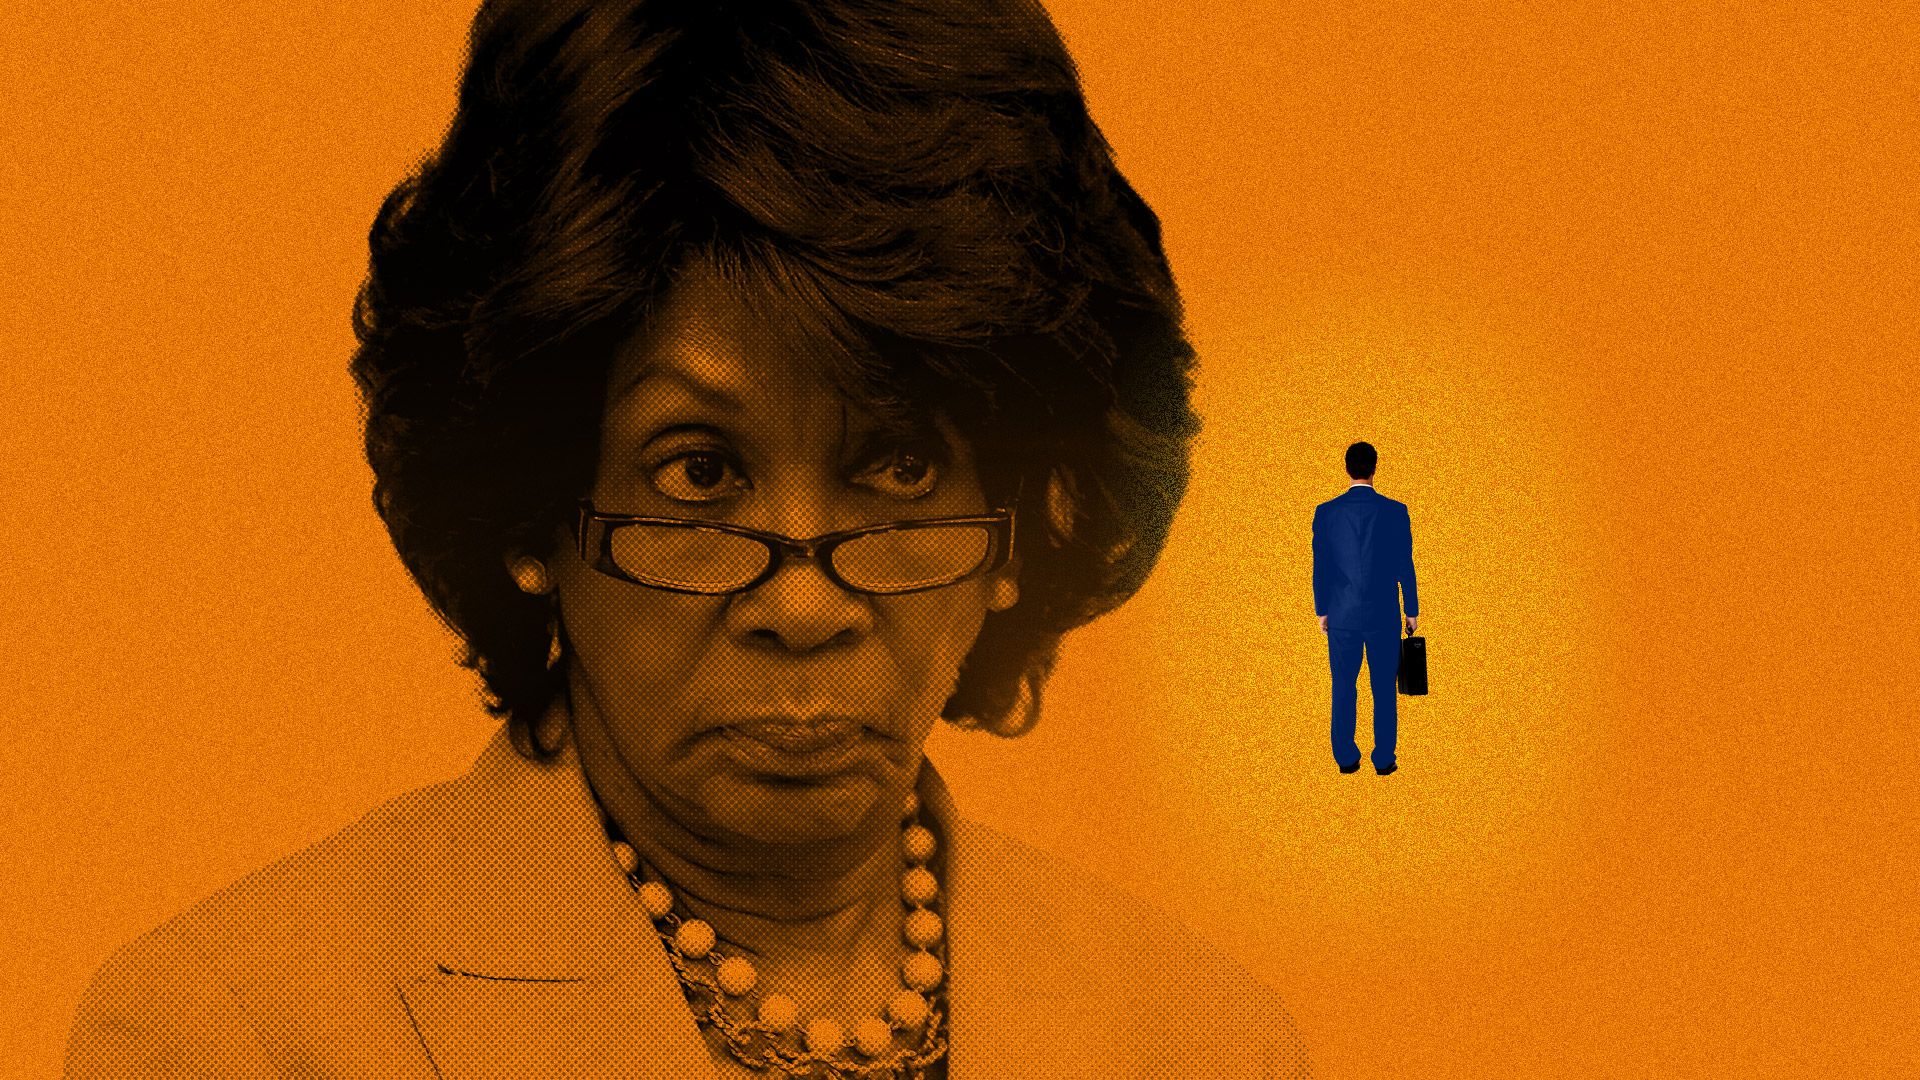 Illustration of Maxine Waters looking at a banker